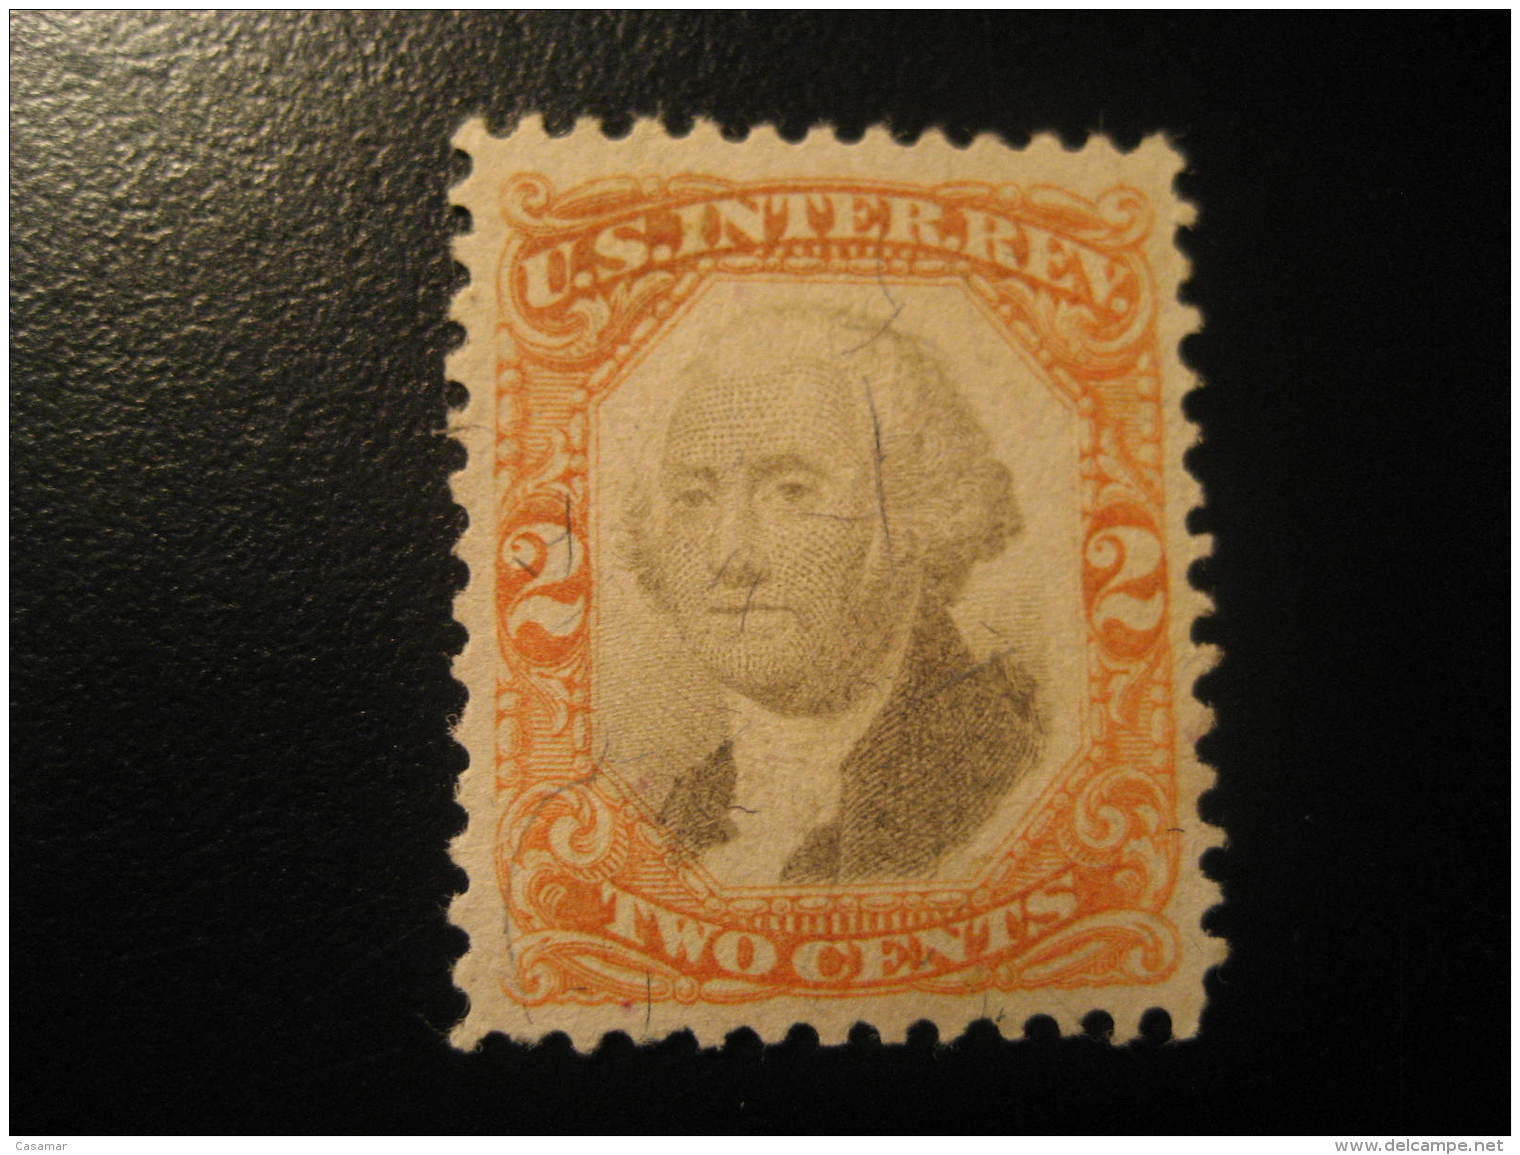 Internal 2 Cents. Revenue Fiscal Tax Postage Due Official USA - Revenues